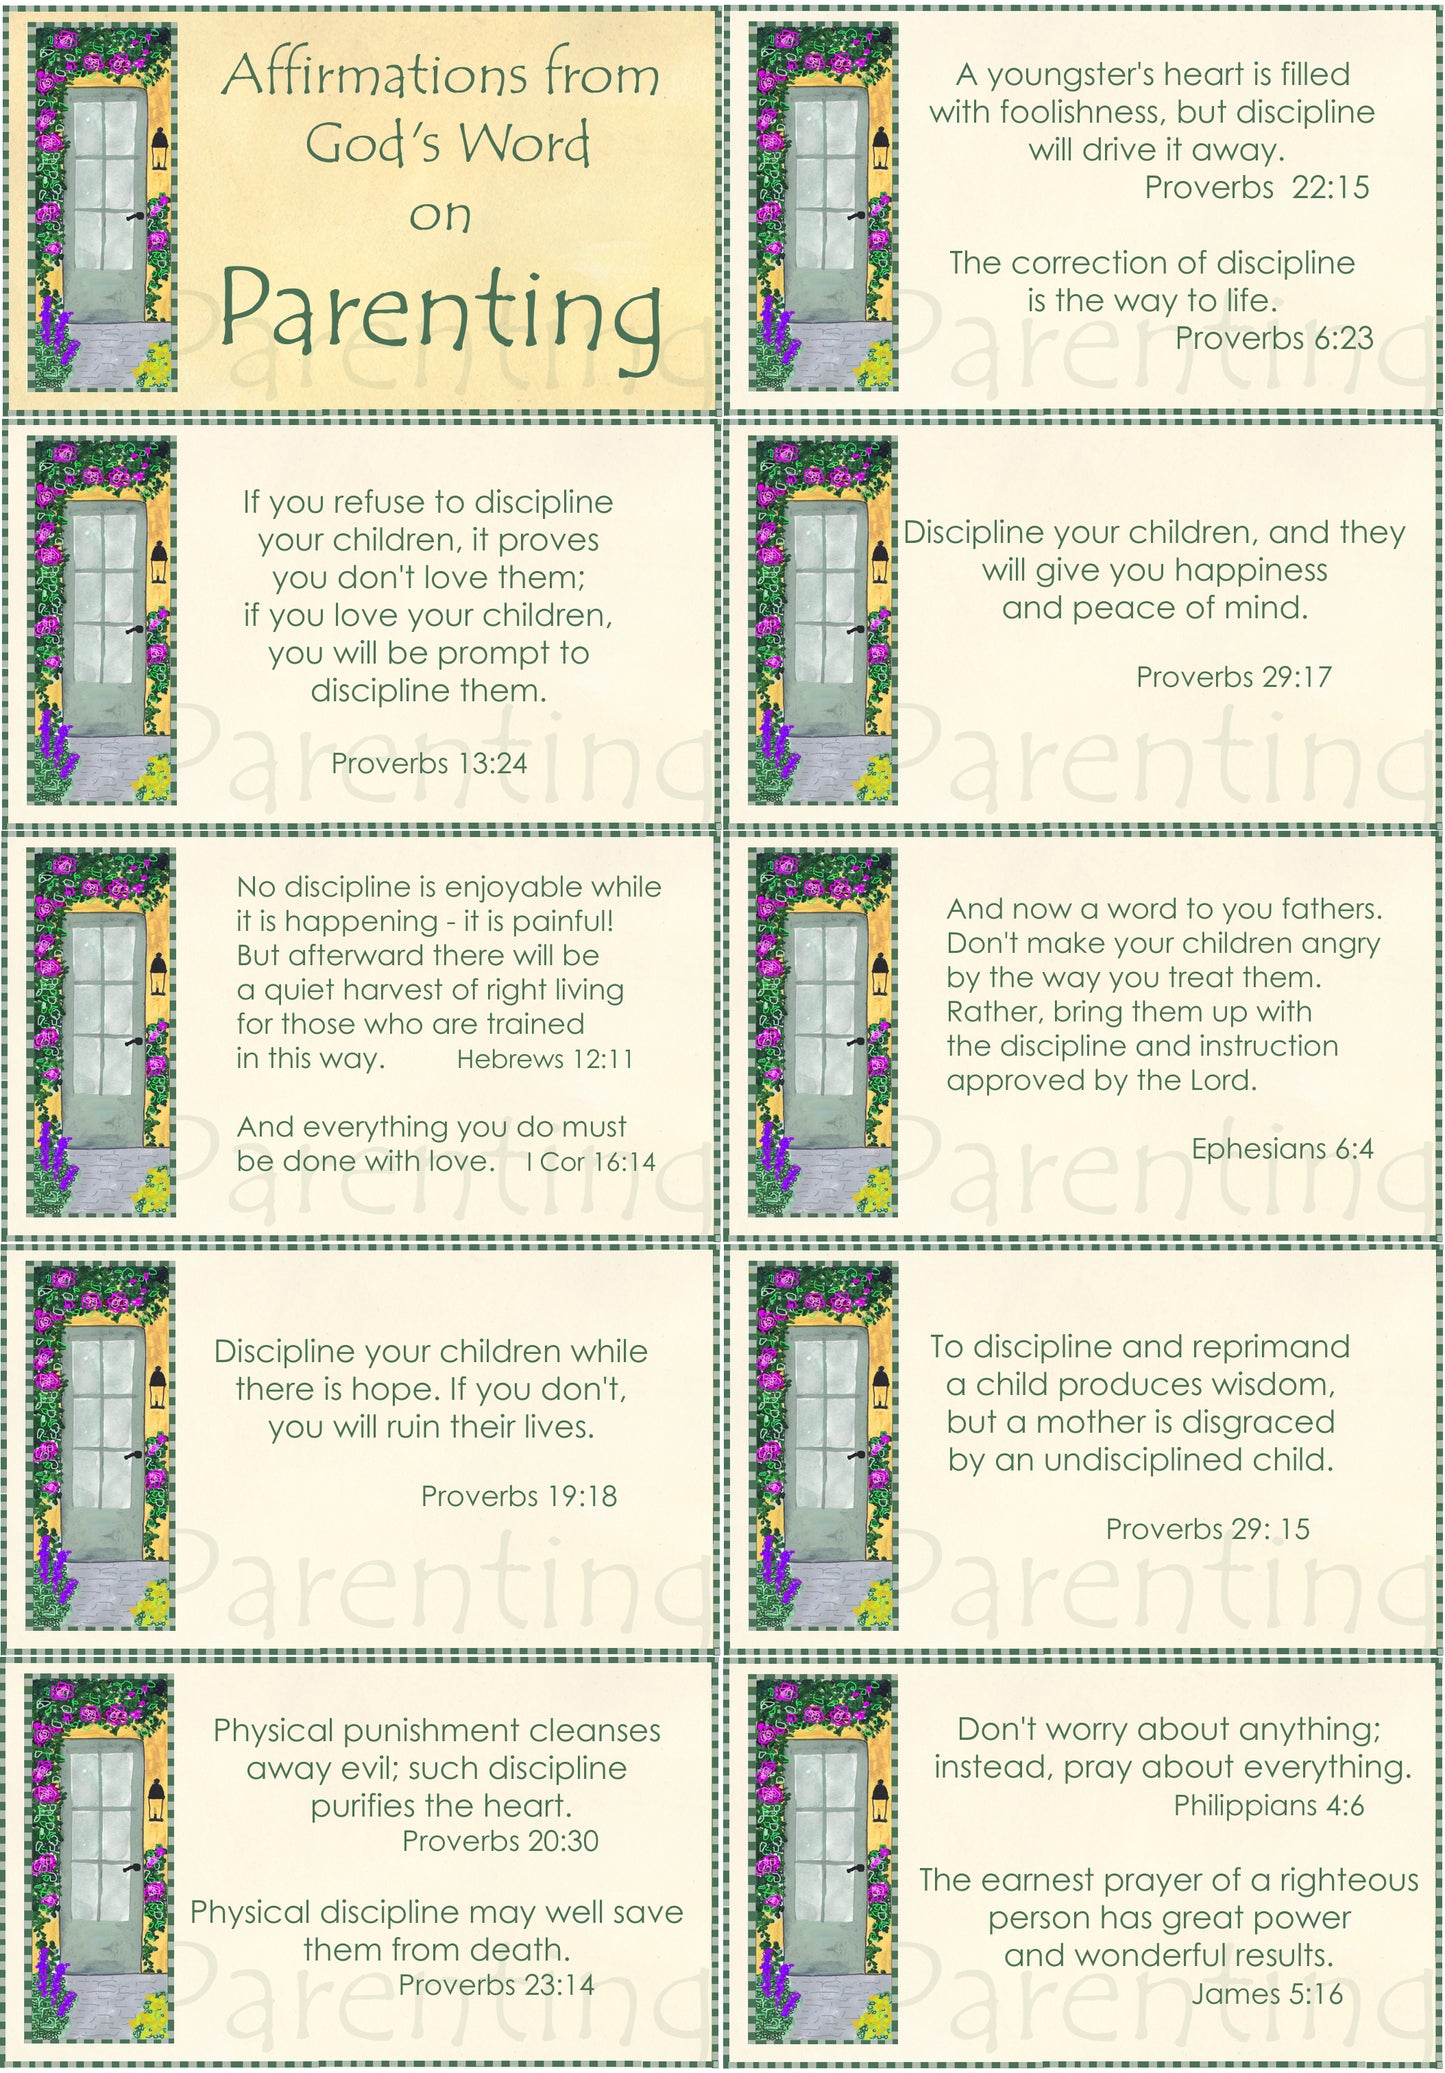 Affirmations from God - Parenting